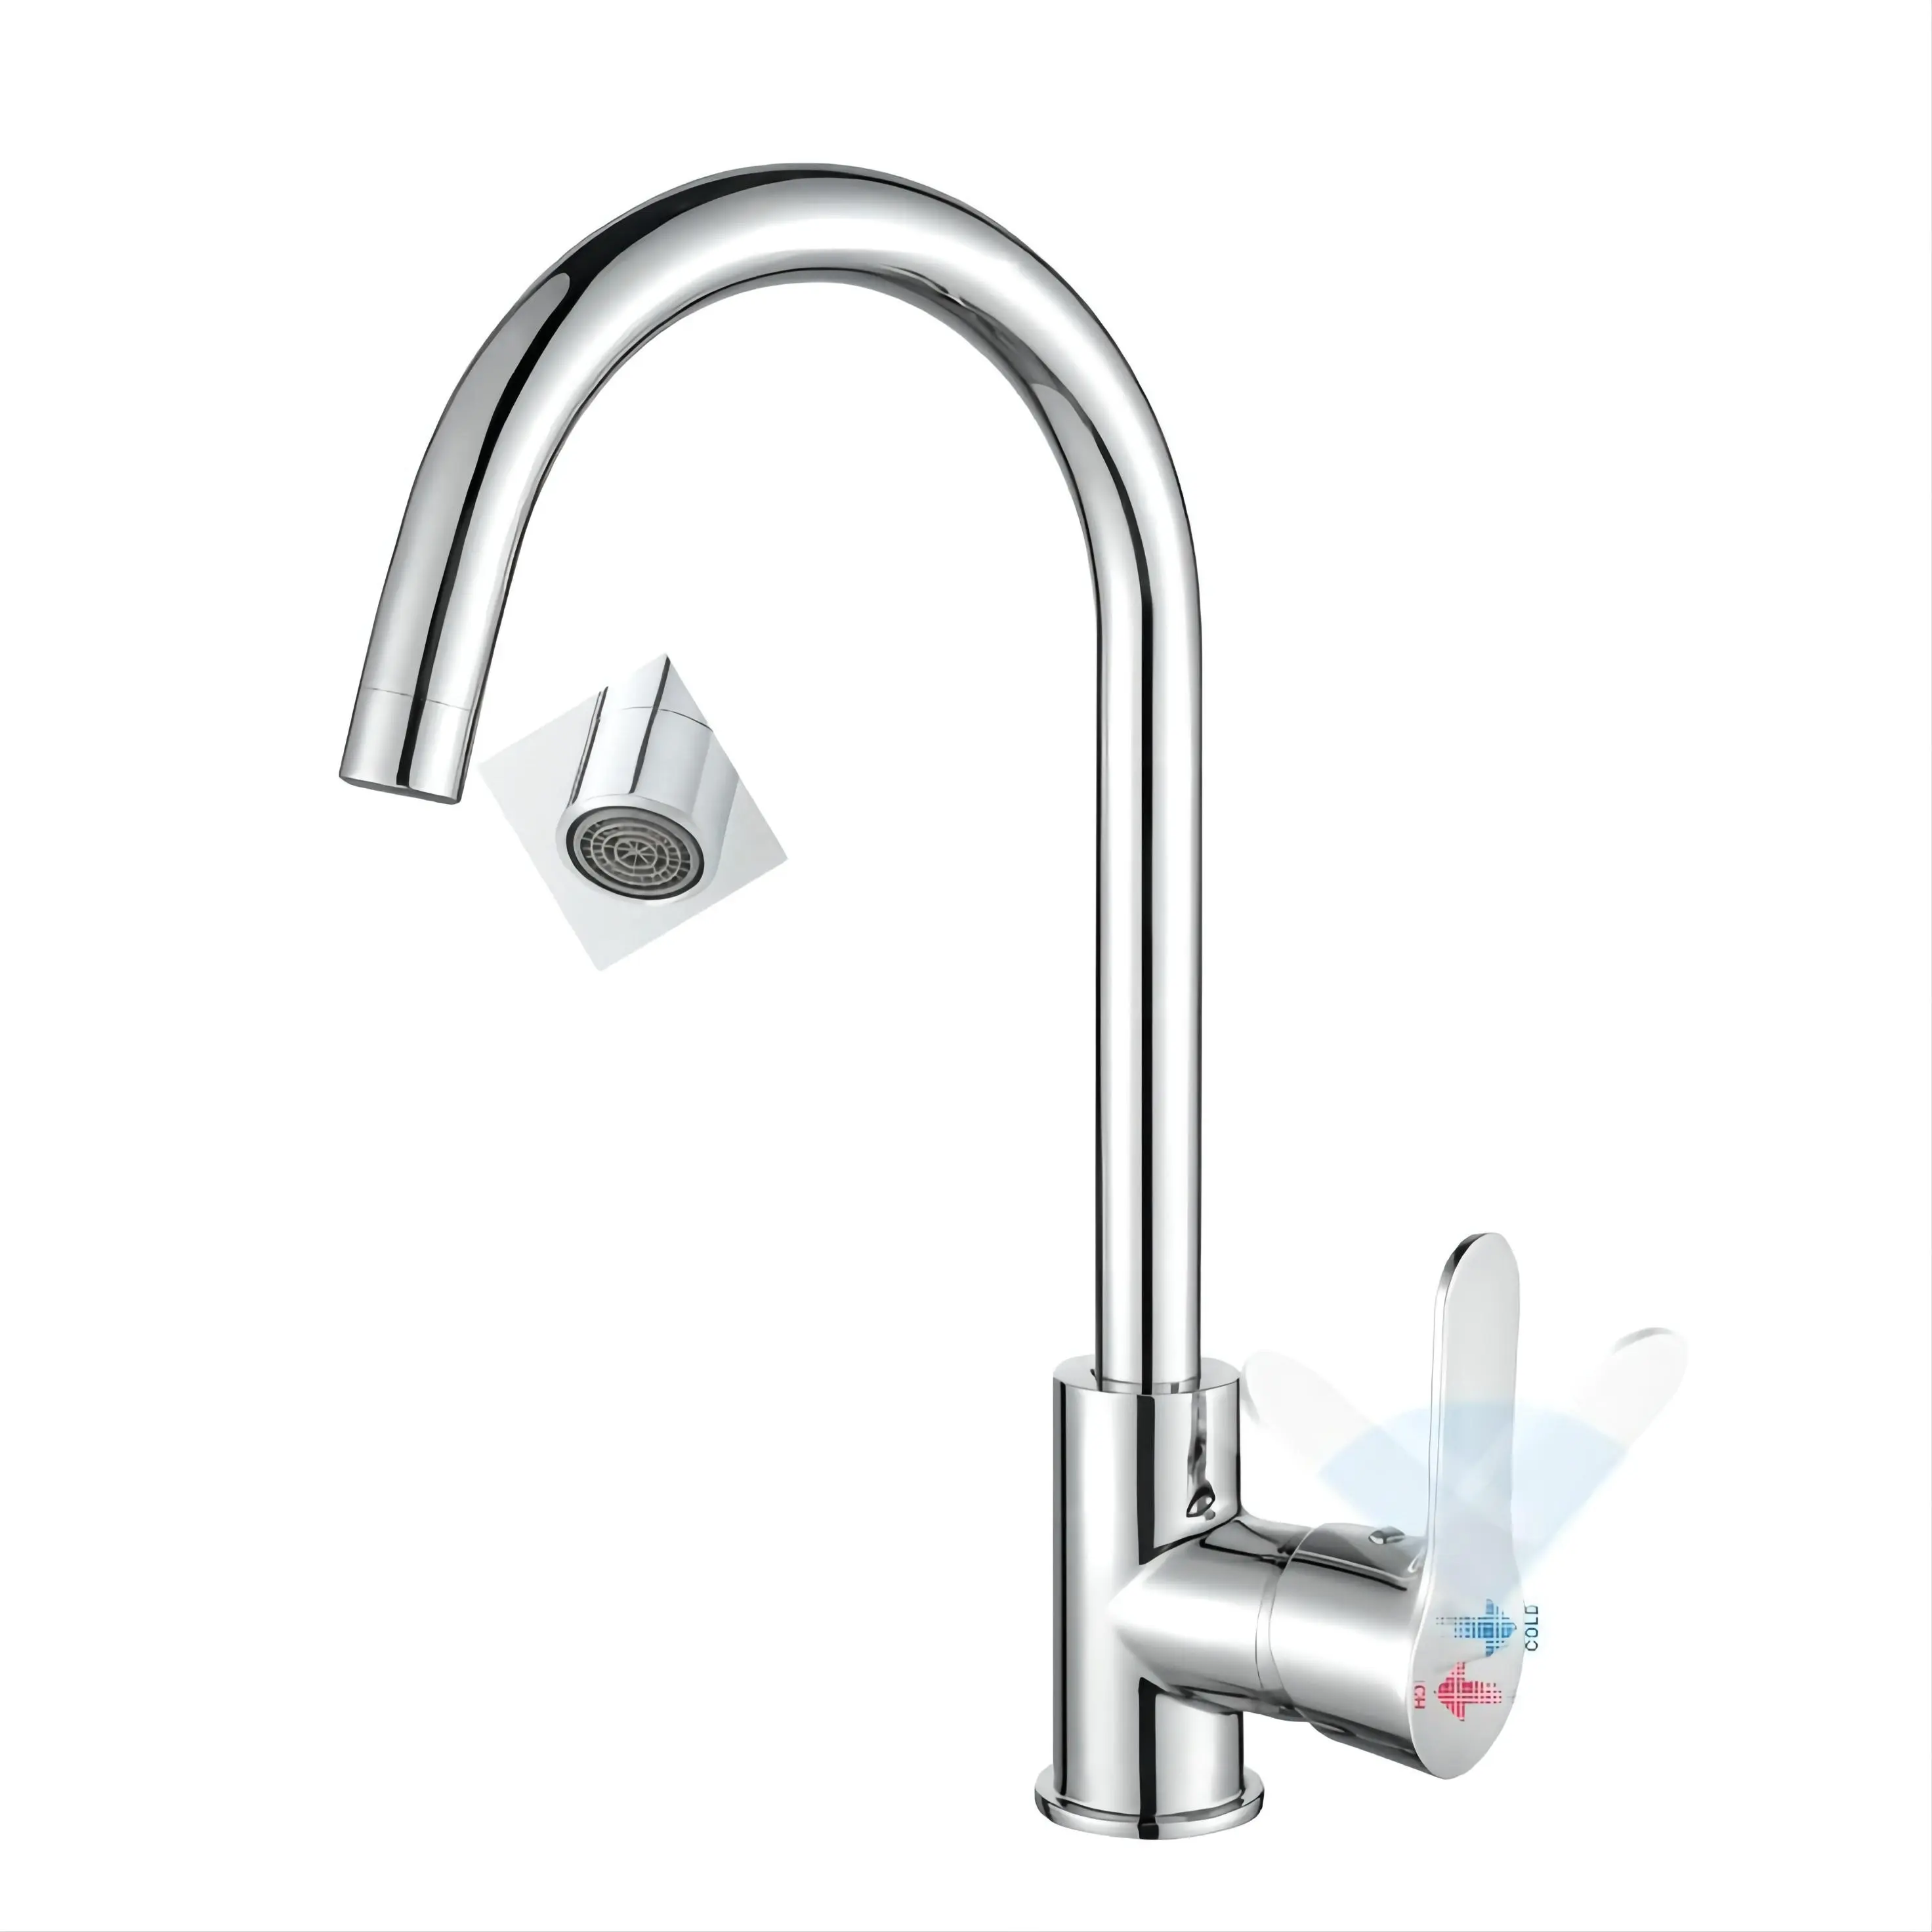 Wholesale Kitchen Sink Mixer Faucet Head Spout for Kitchen Chrome Plated Single Handle Stainless Steel Graphic Design